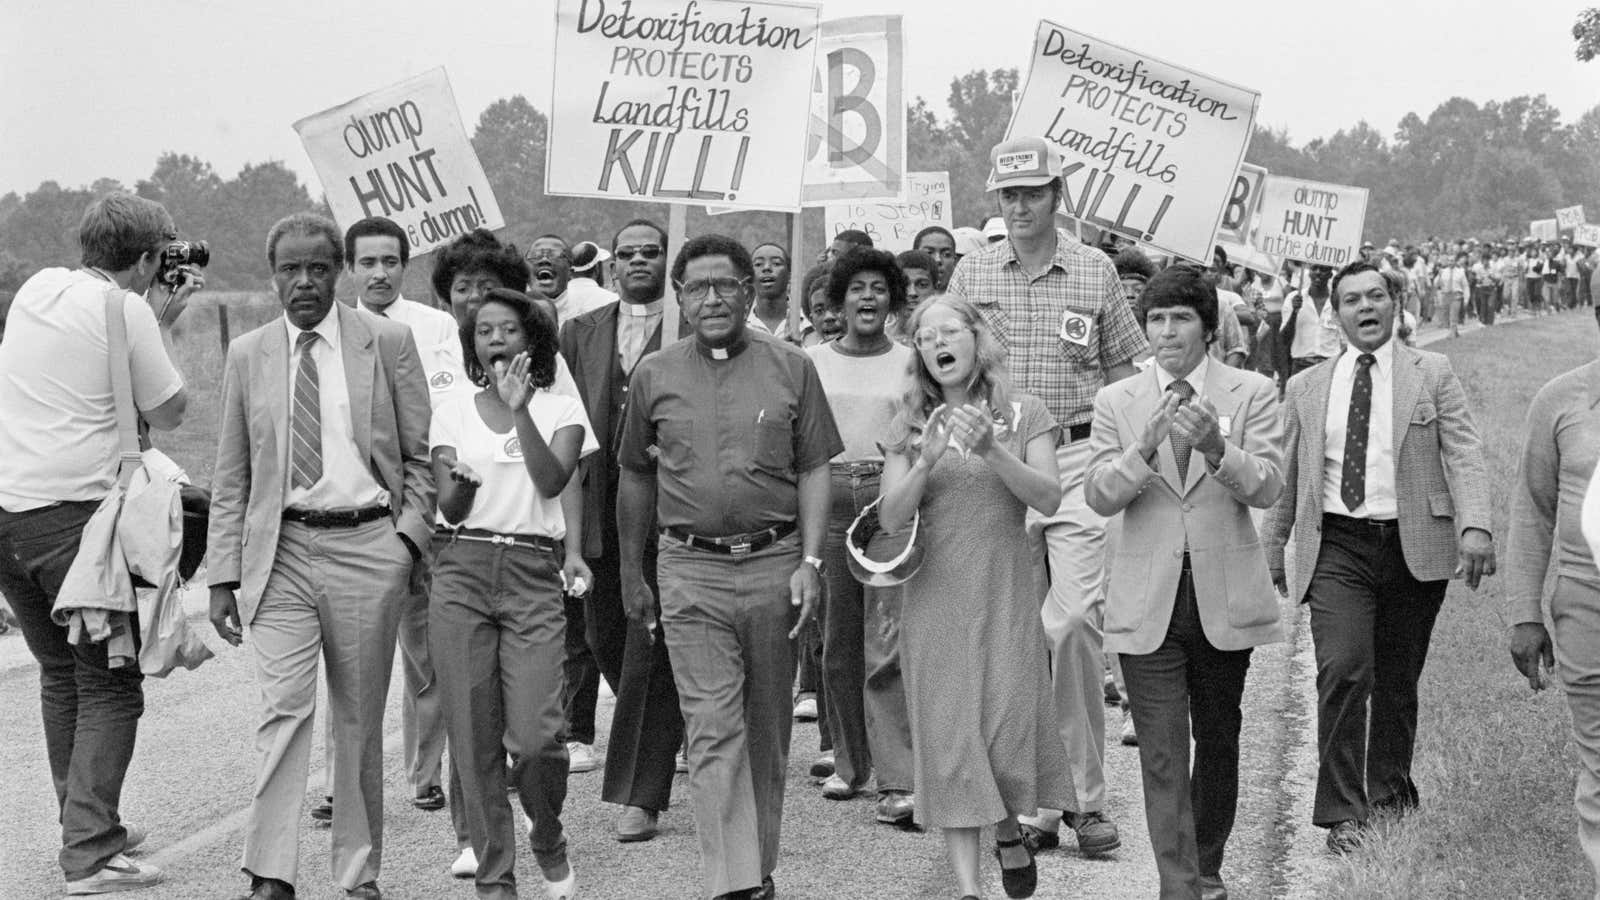 The protests against a toxic dump site in Warren County, North Carolina, in 1982 kicked off what we know today as the “environmental justice movement.” Many in this rural community contended Warren County was chosen as the site because most of its citizens were Black and poor.
